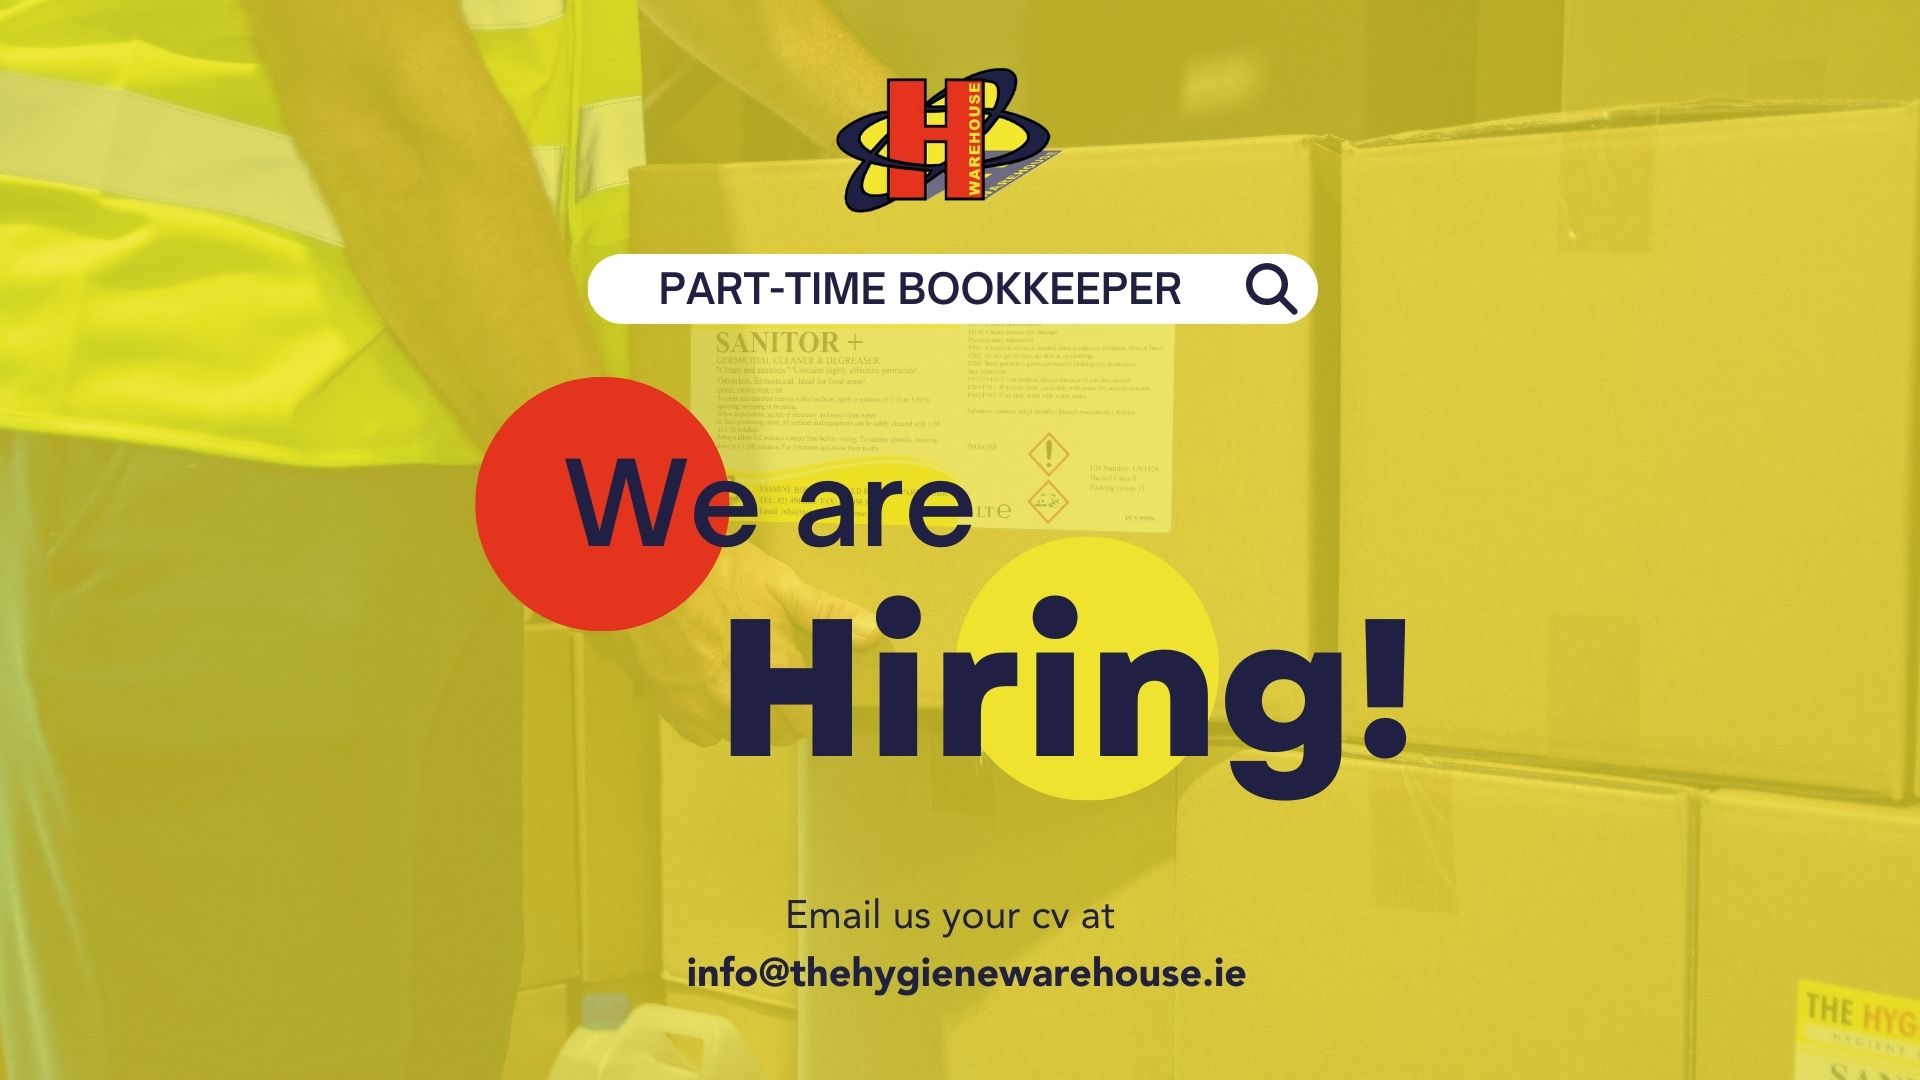 Join Our Team as a Part-time Bookkeeper at The Hygiene Warehouse